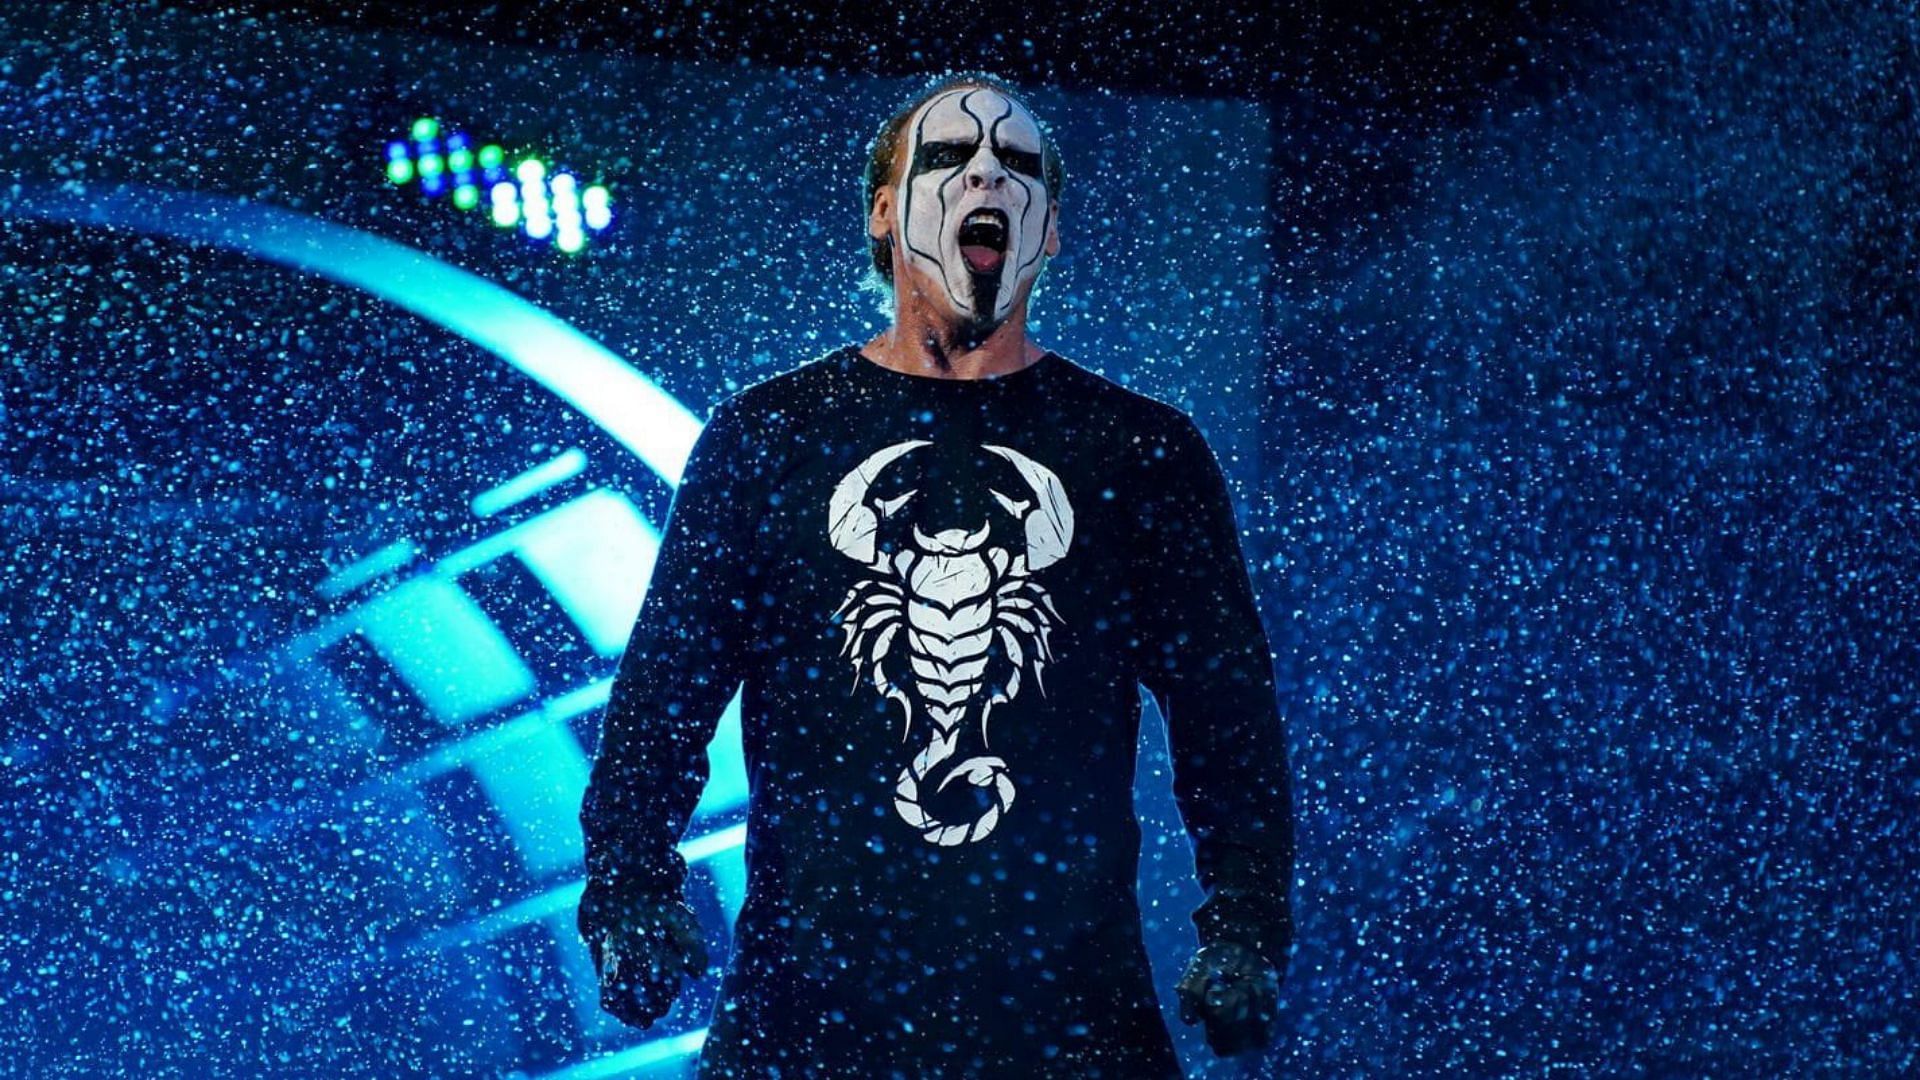 &quot;The Icon&quot; Sting at an AEW event in 2021